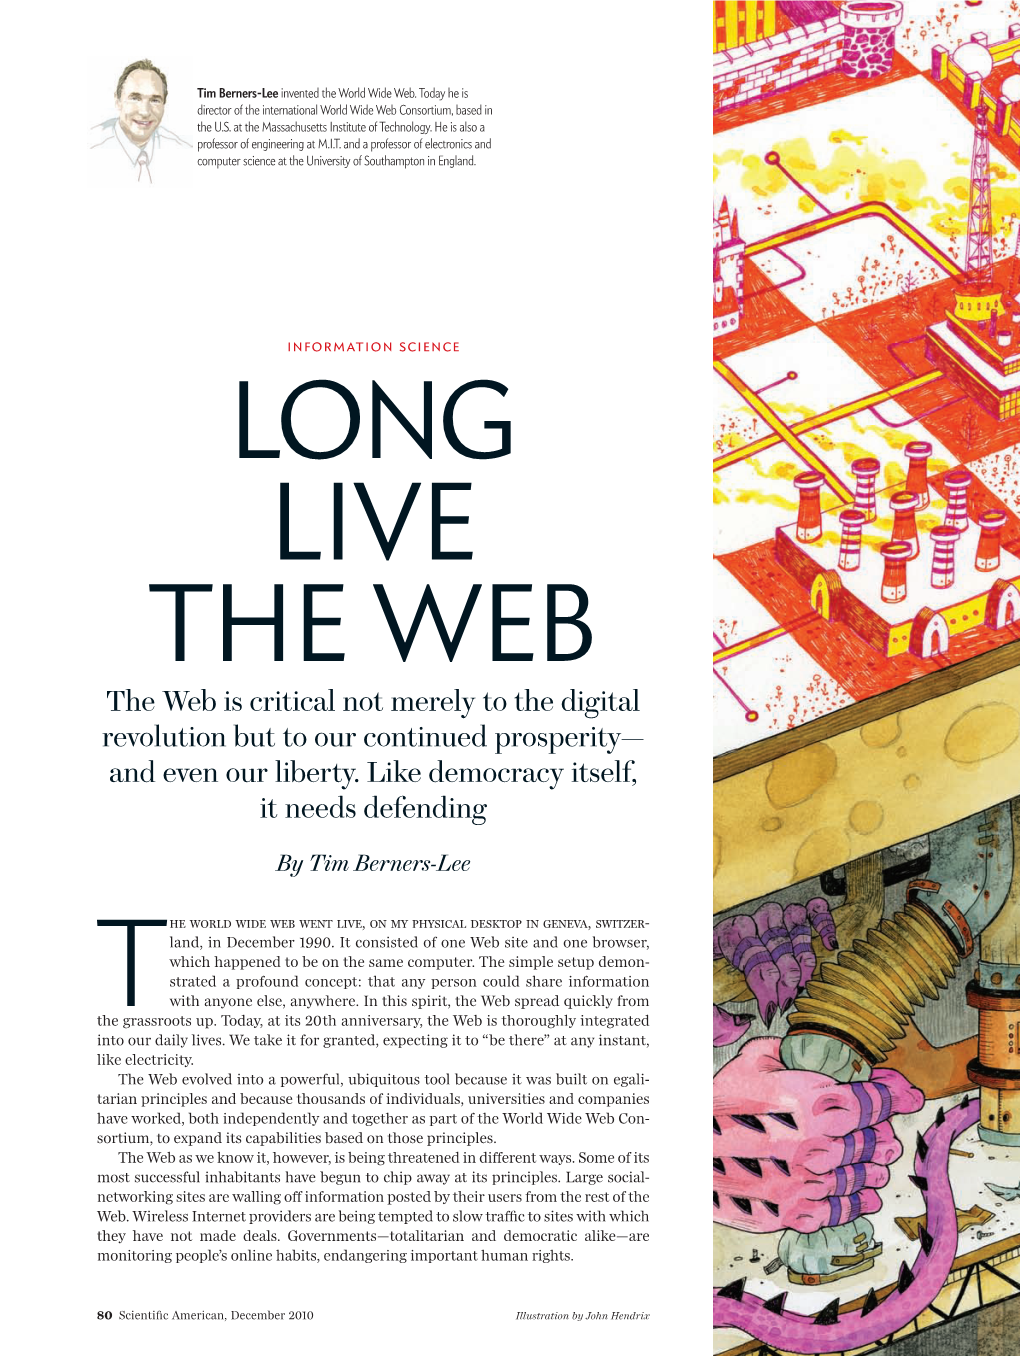 Long Live the Web the Web Is Critical Not Merely to the Digital Revolution but to Our Continued Prosperity— and Even Our Liberty